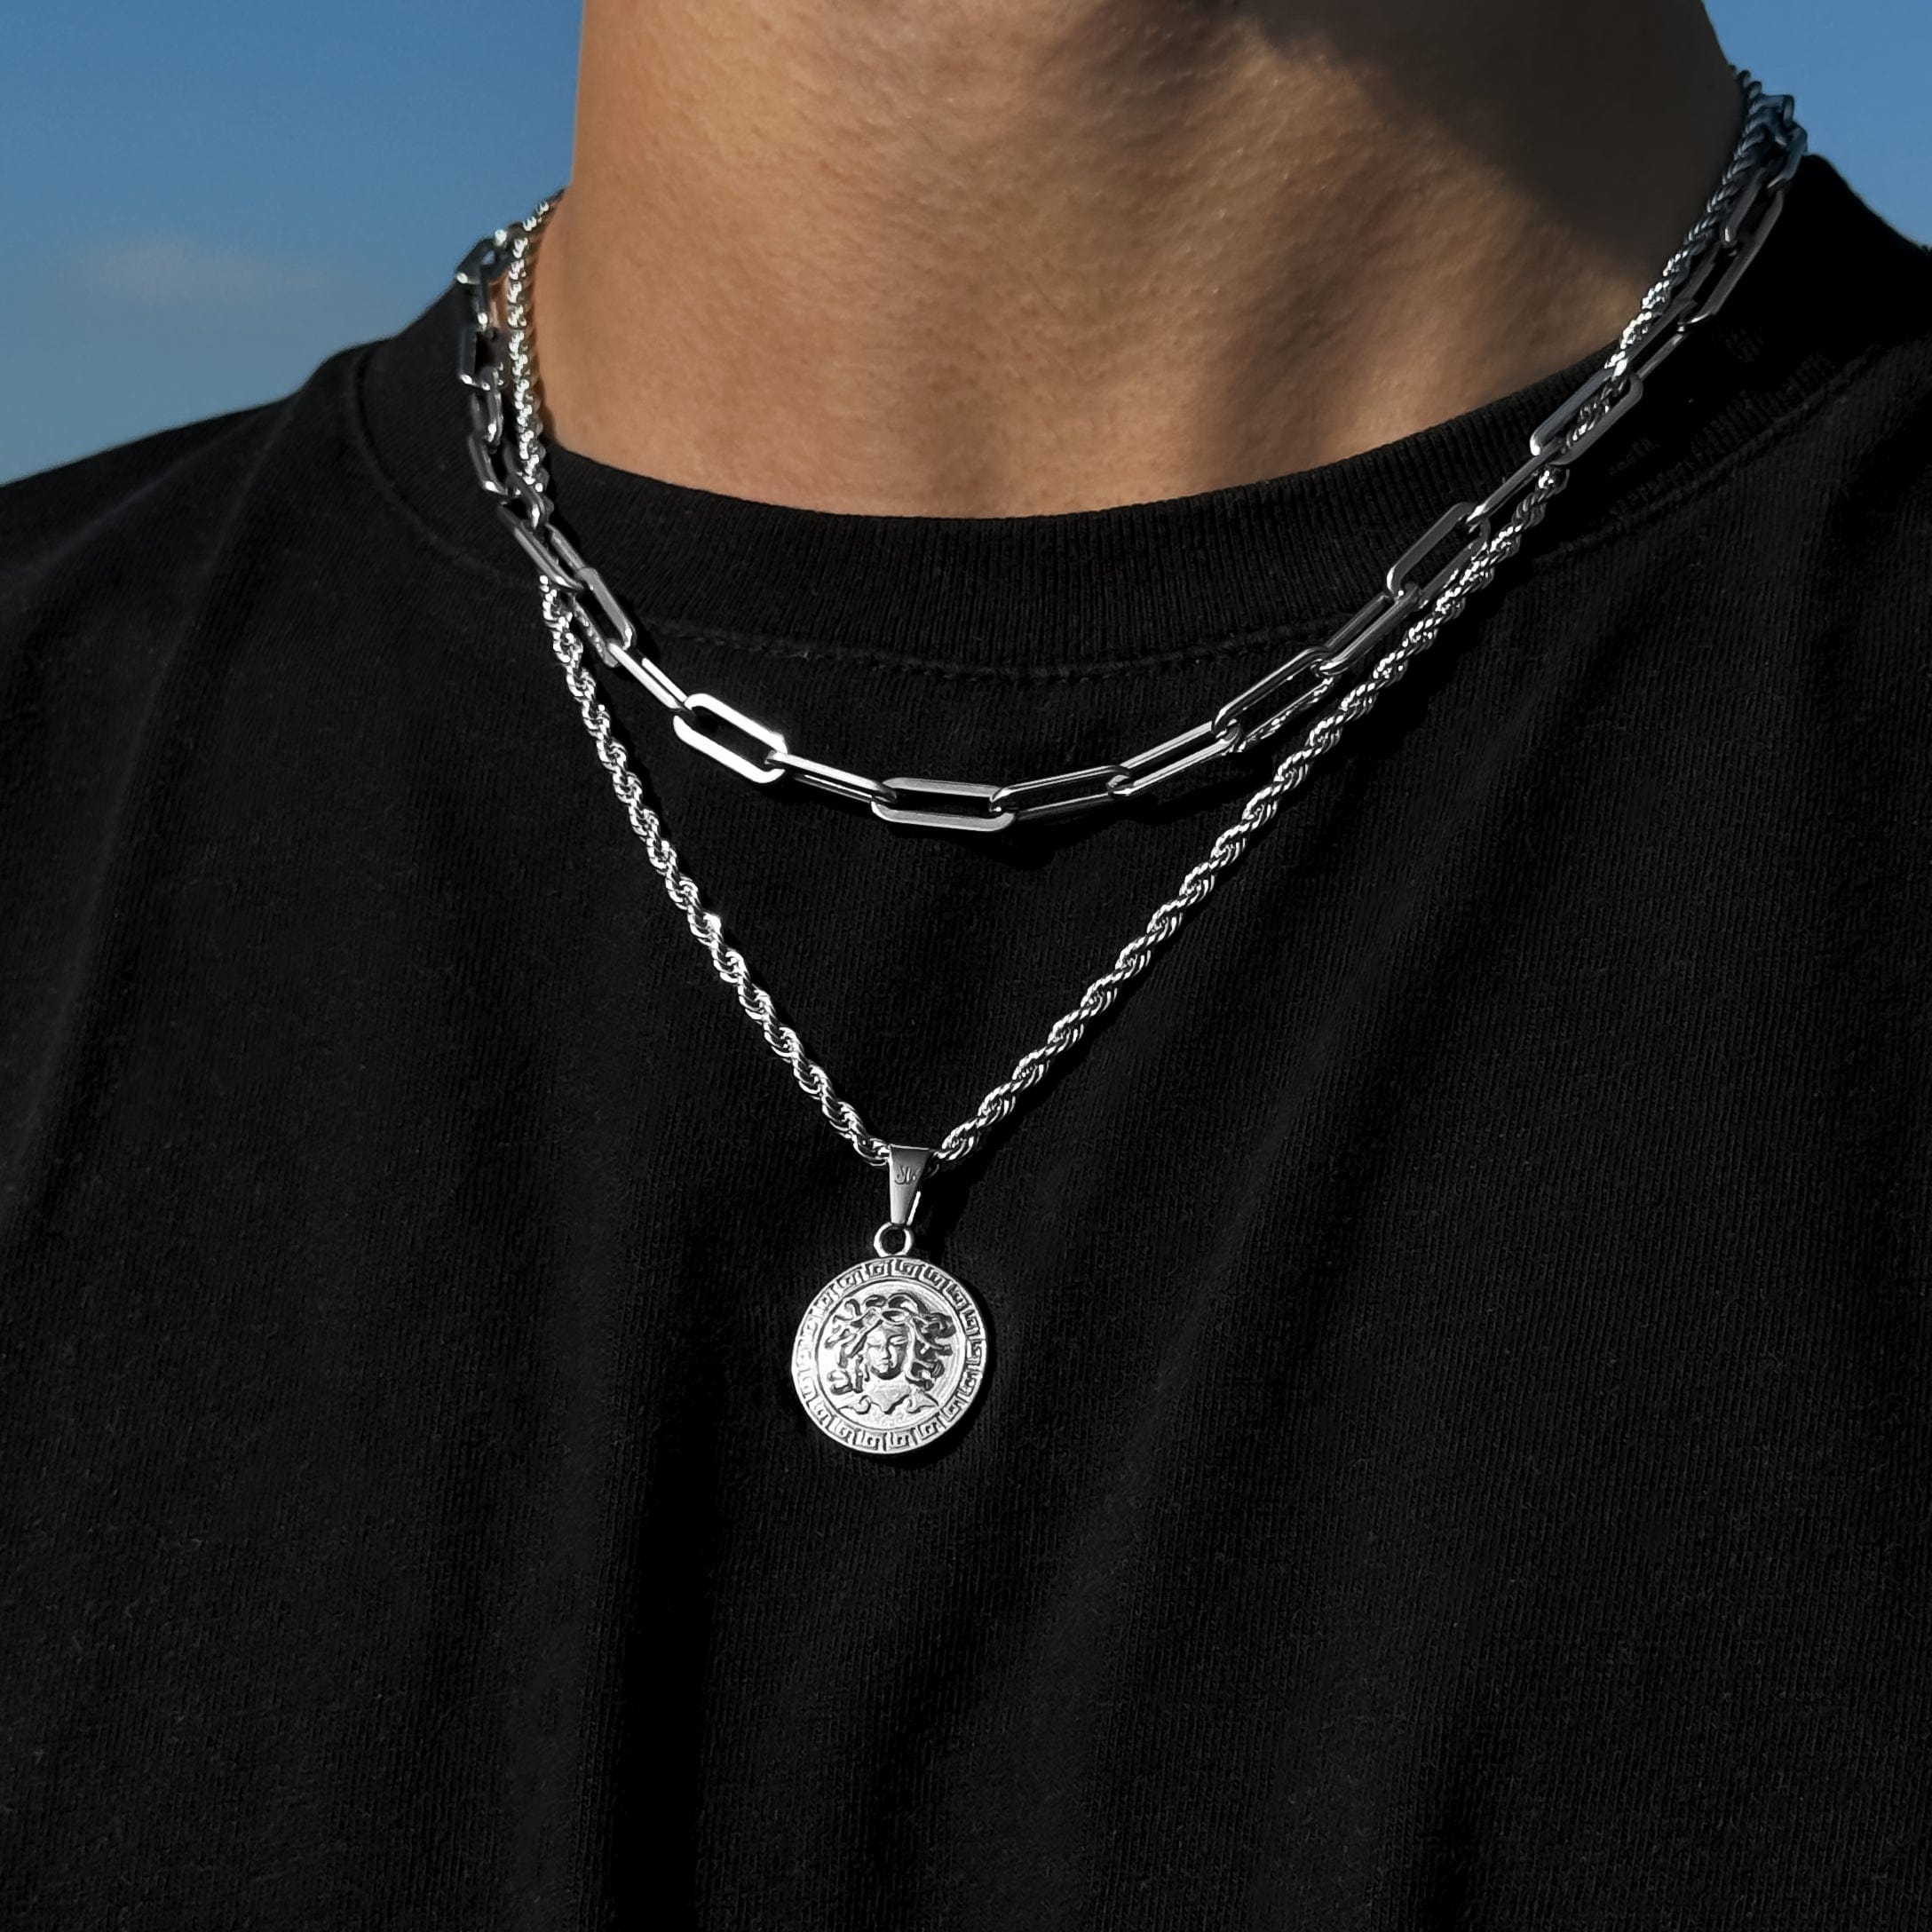 Chain with Pendant Medusa Rope Chain - Silver (3mm) - JVillion®